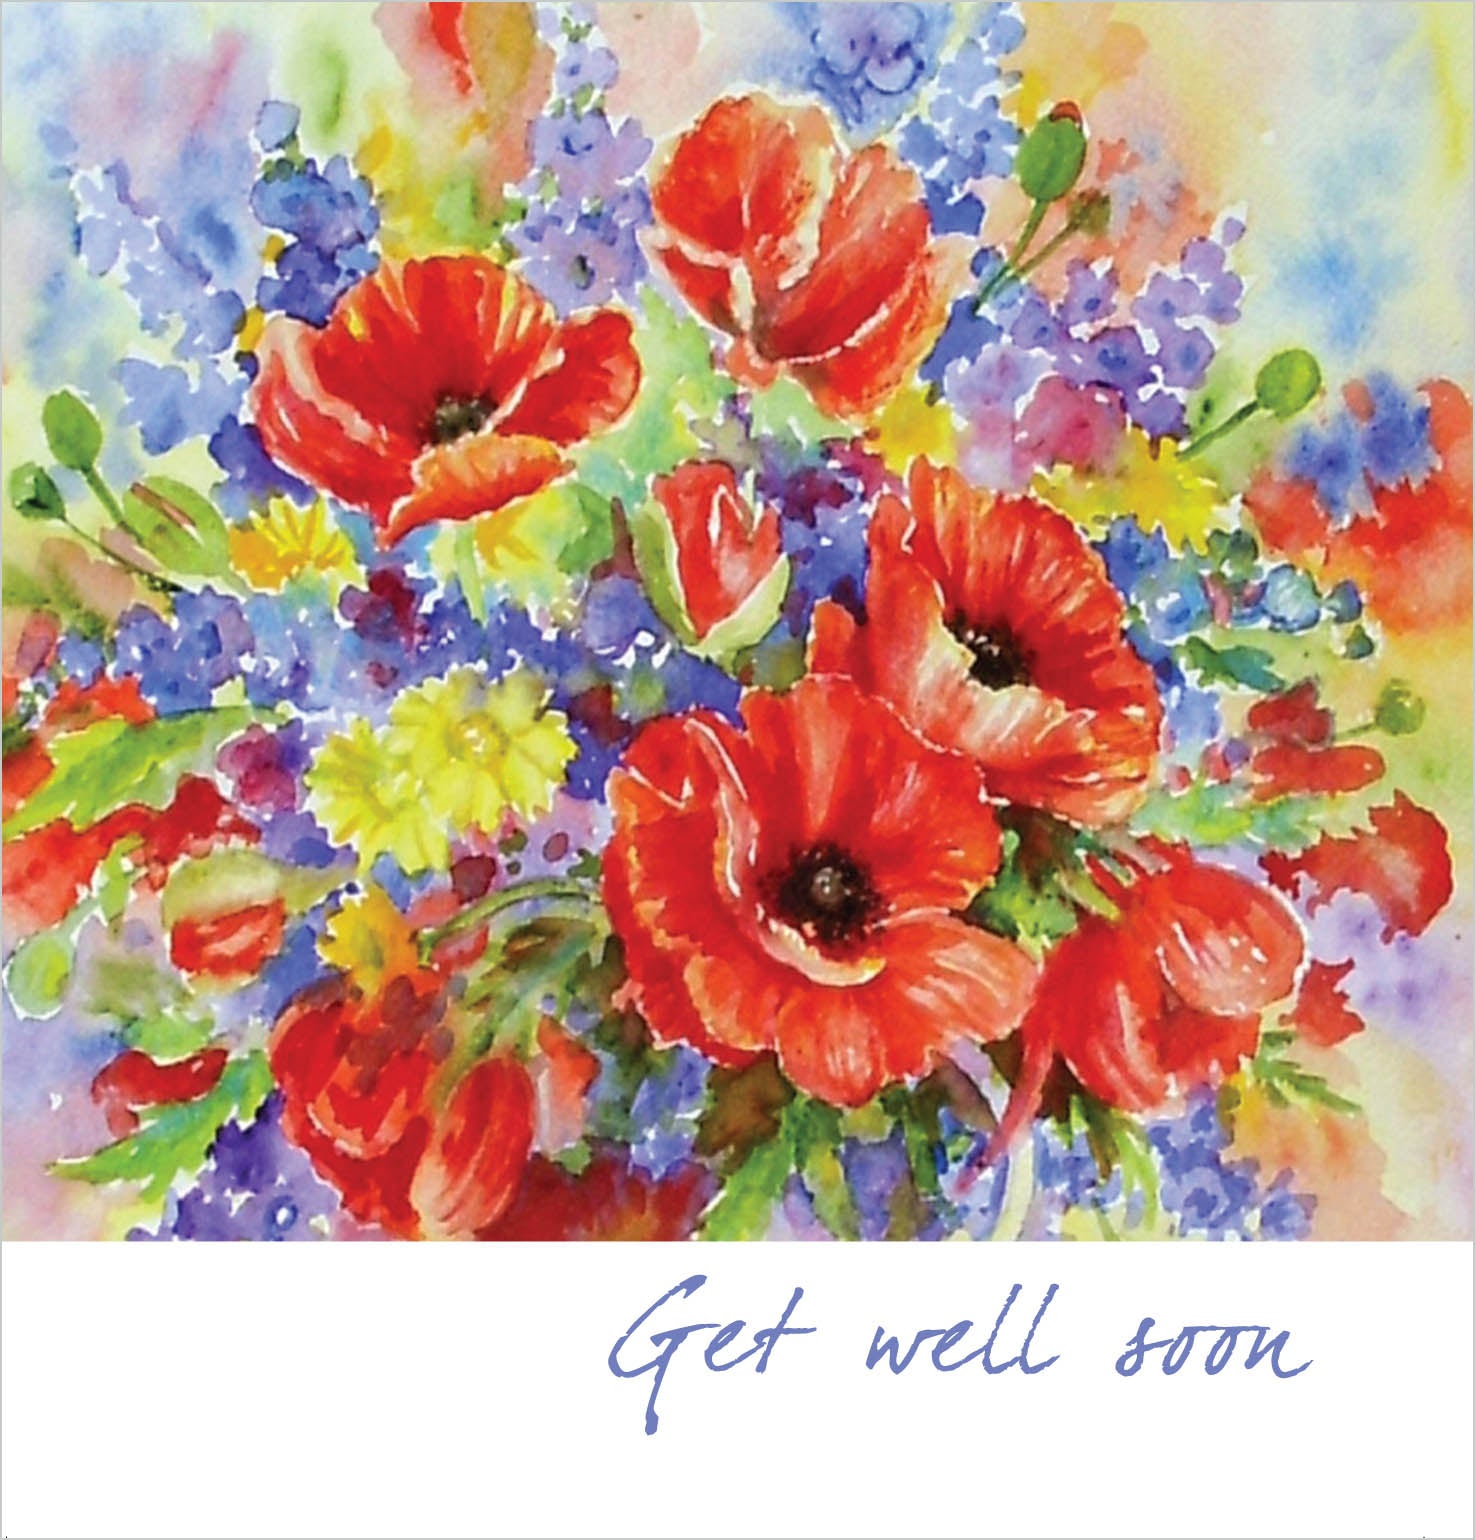 Get Well Soon- Square Card TexturedGet Well Soon- Square Card Textured